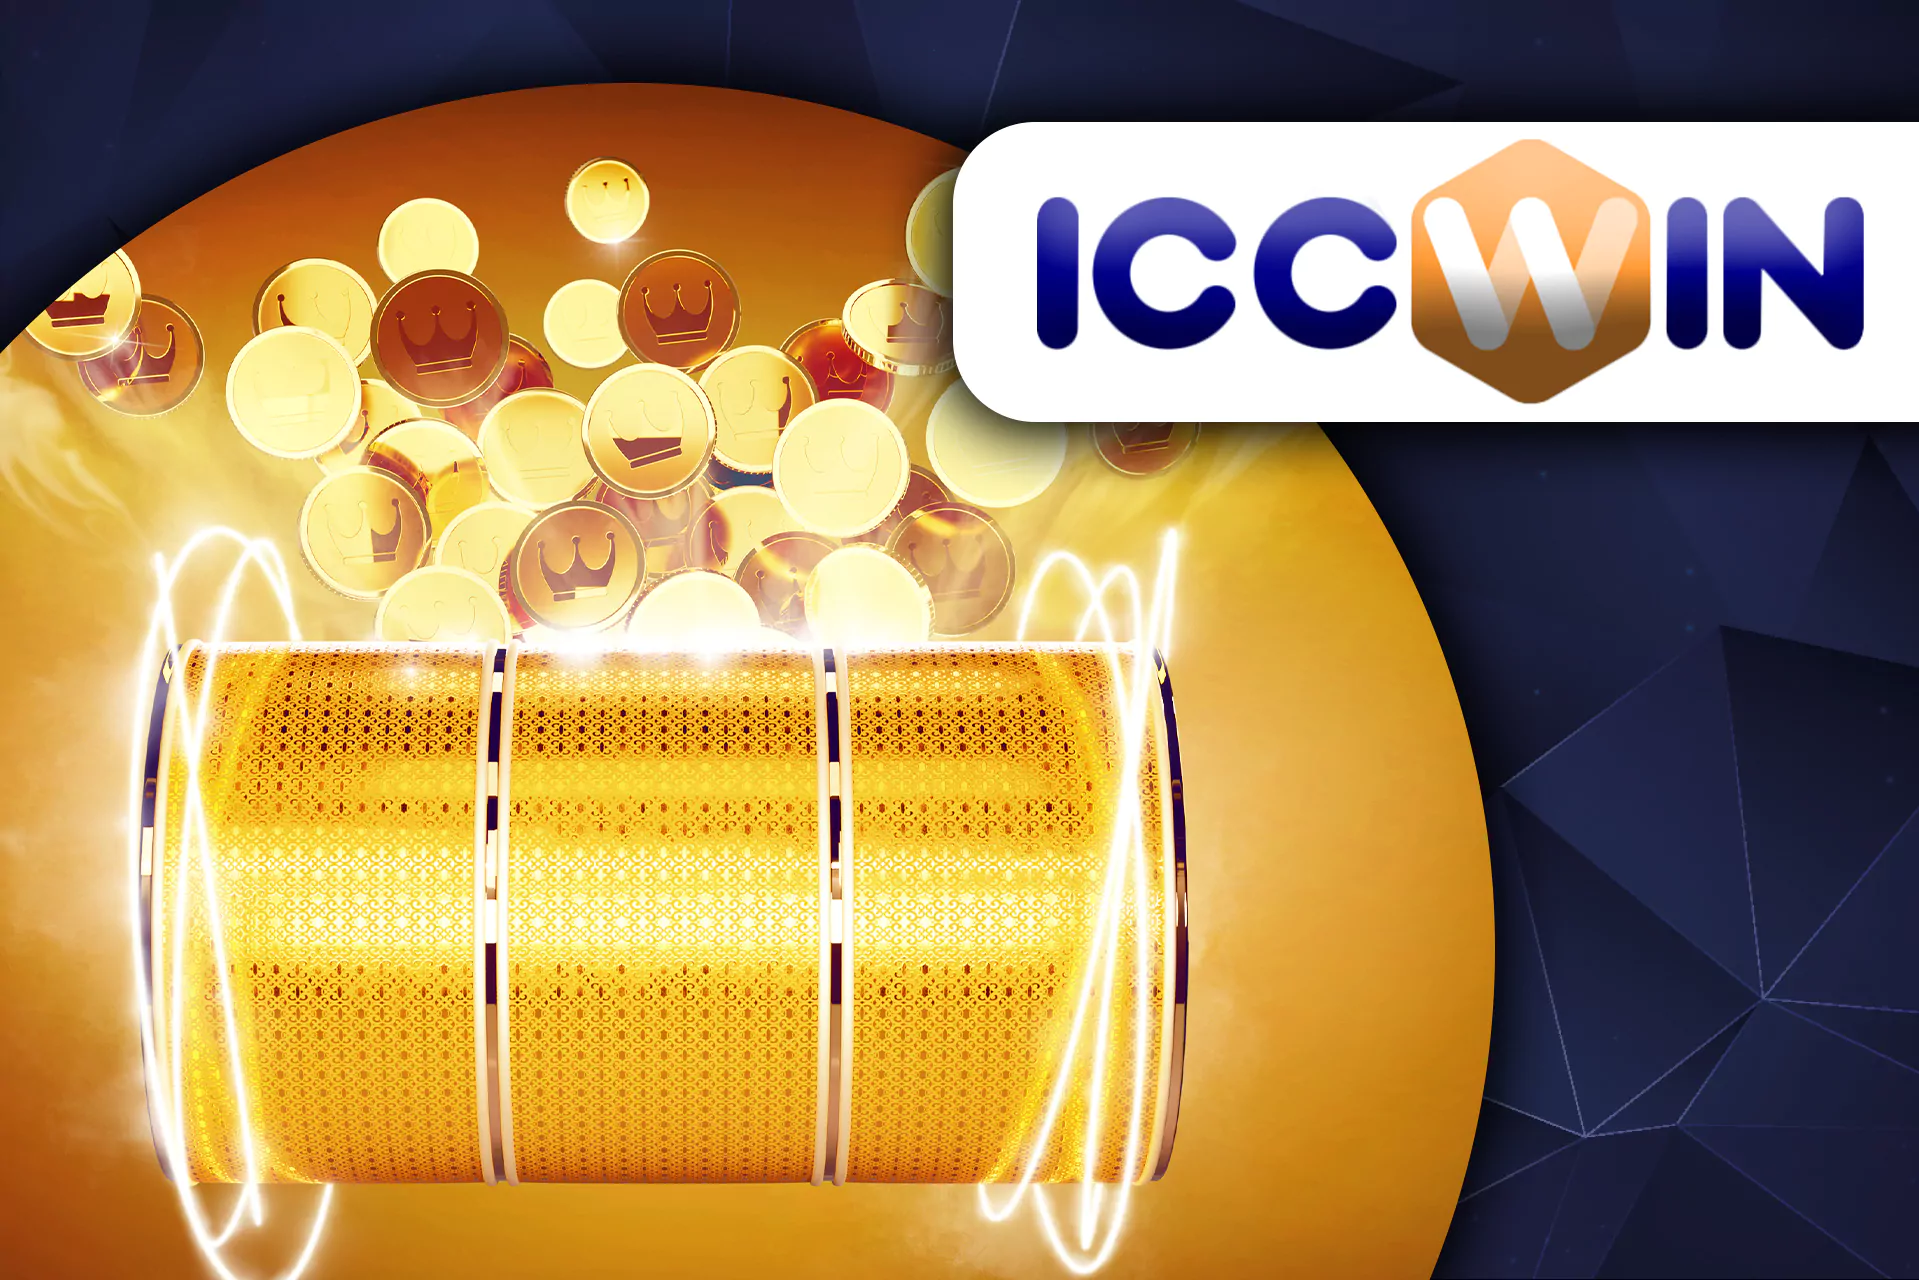 Play these games to win big jackpots in the ICCWIN casino.